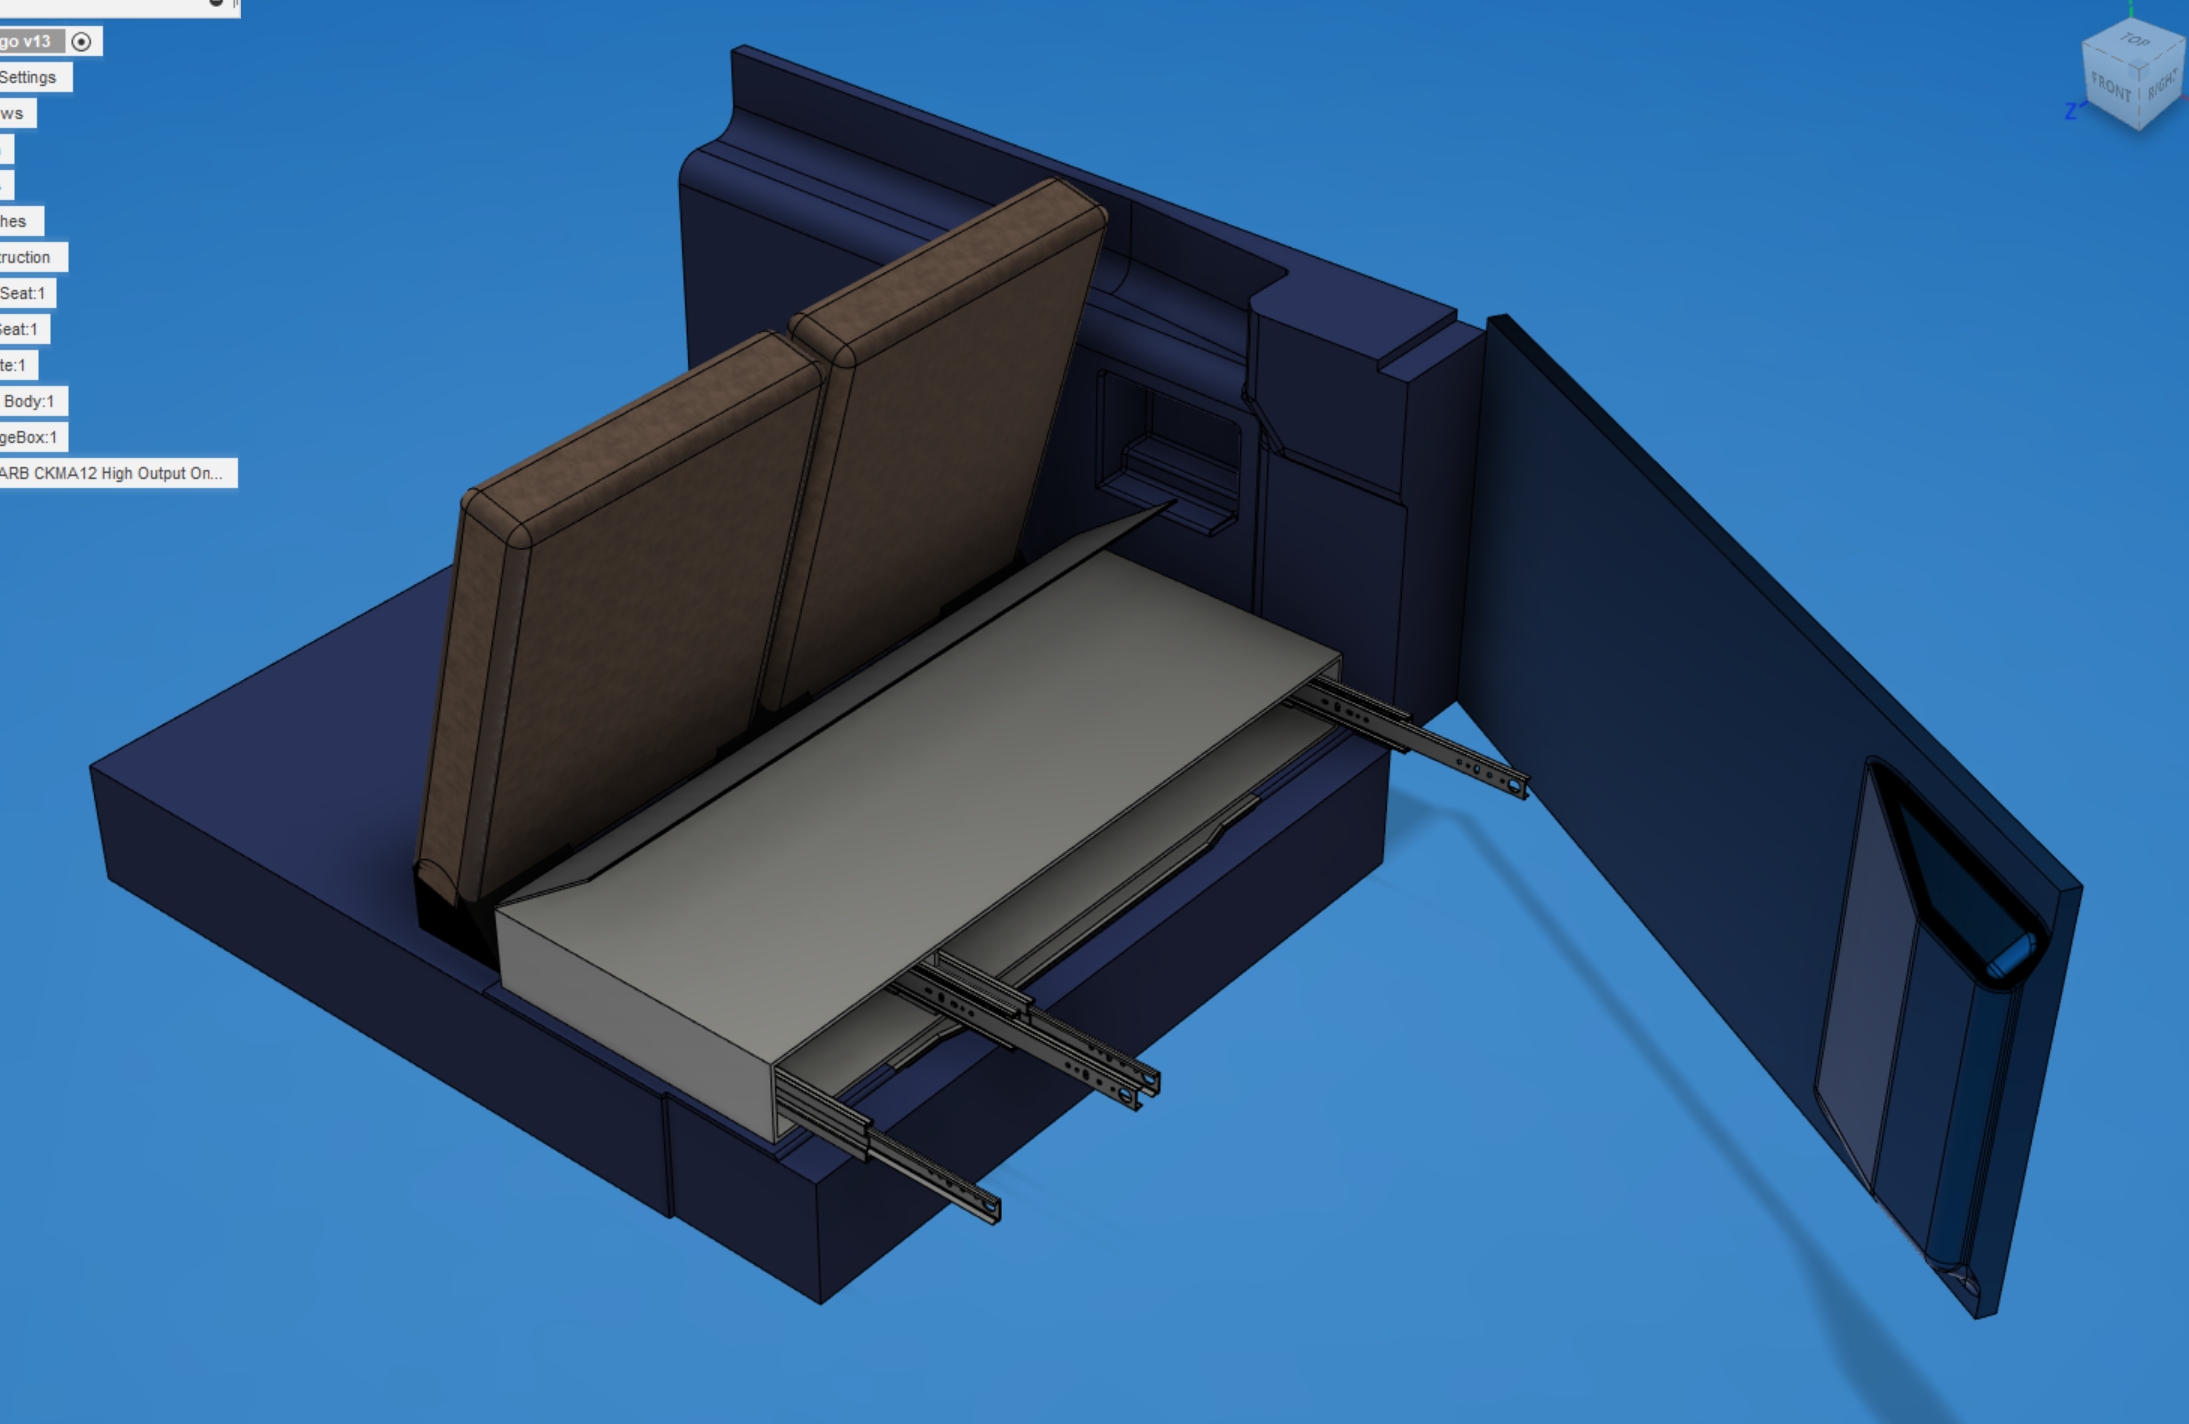 Ford Bronco Product idea for 2 doors - storage solution like the cargo drawer image